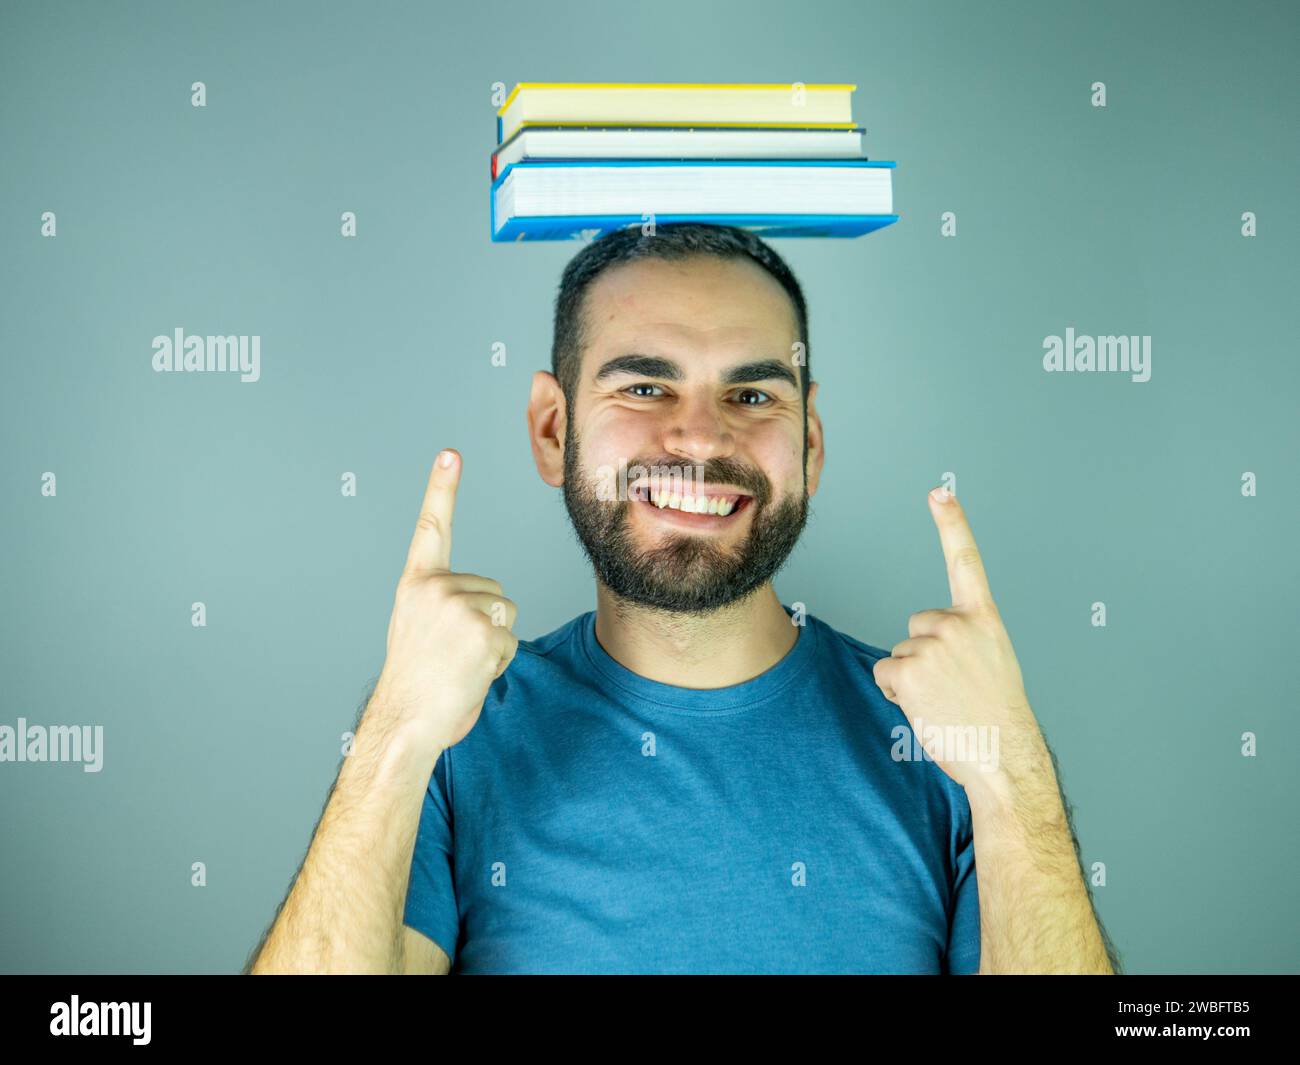 young bearded man with a pile of books on his head pointing up while looking at camera Stock Photo